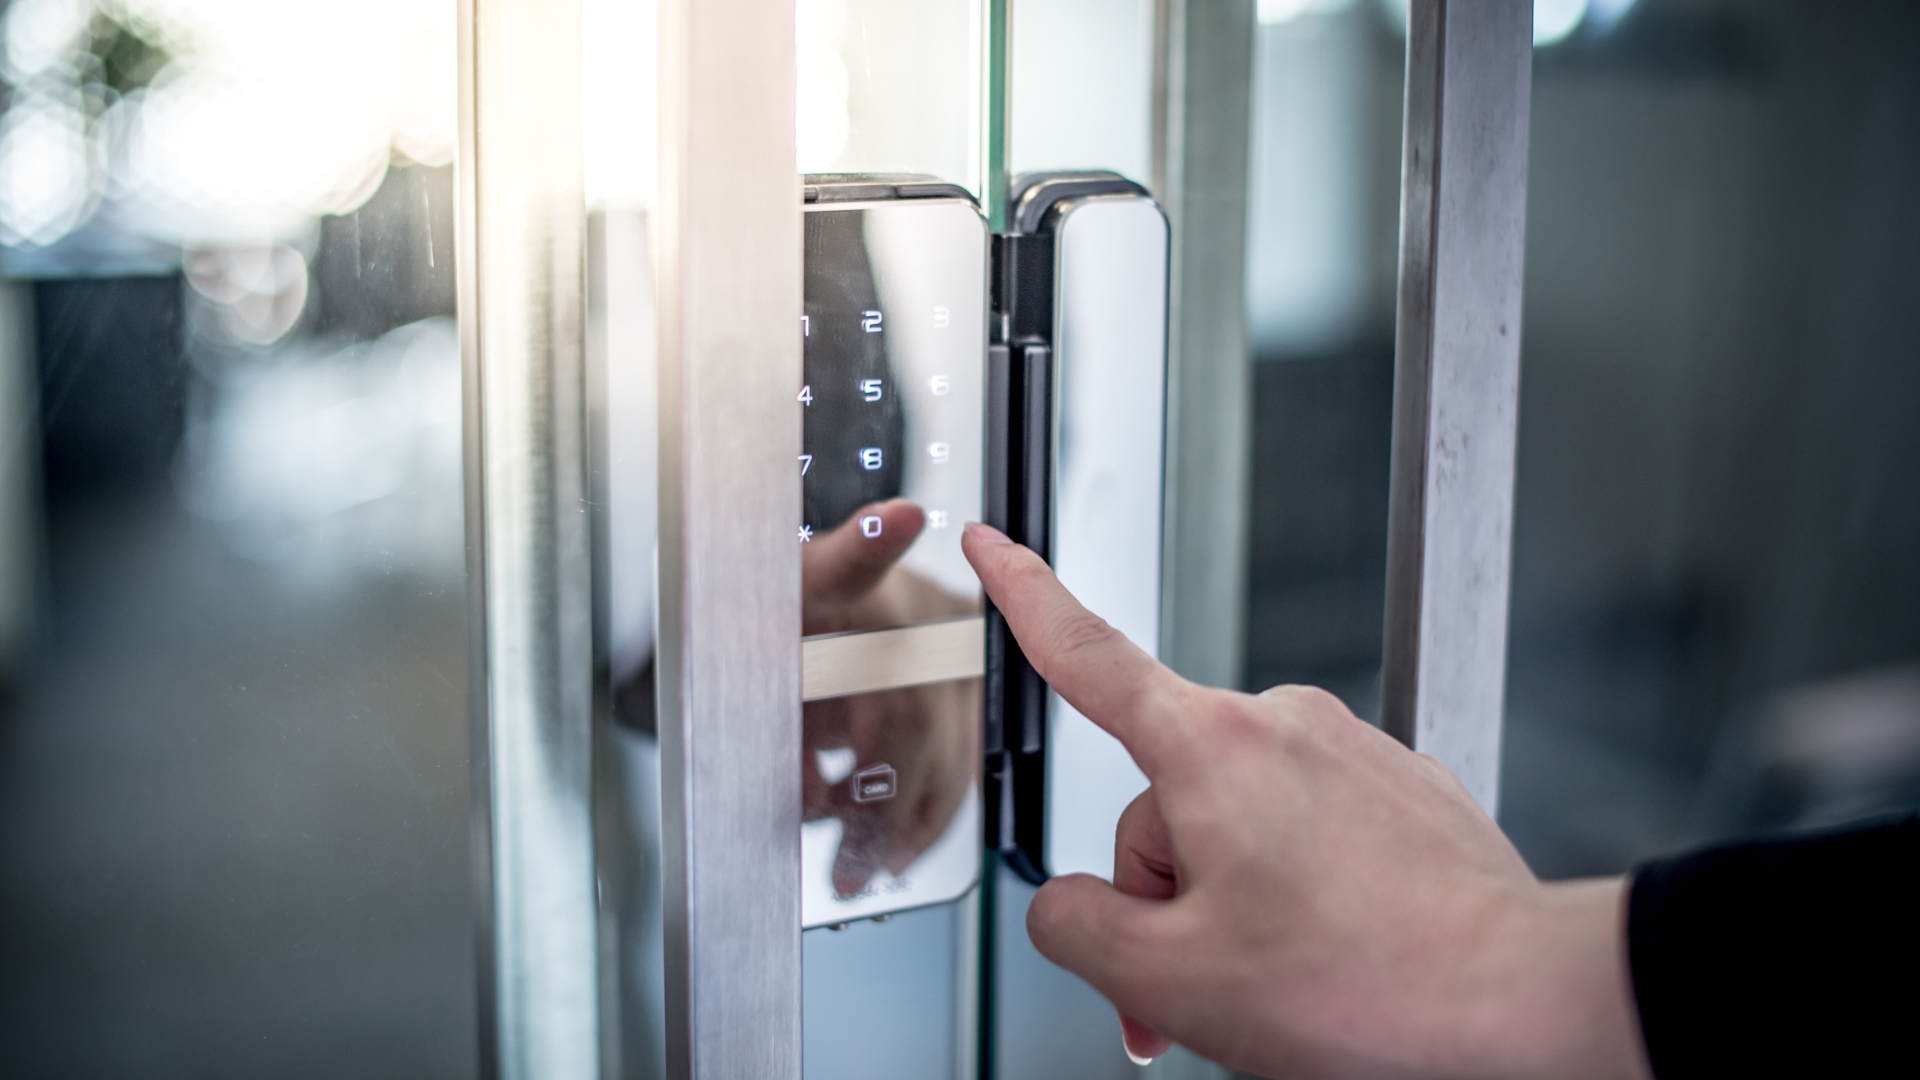 A smart lock as part of a commercial door hardware